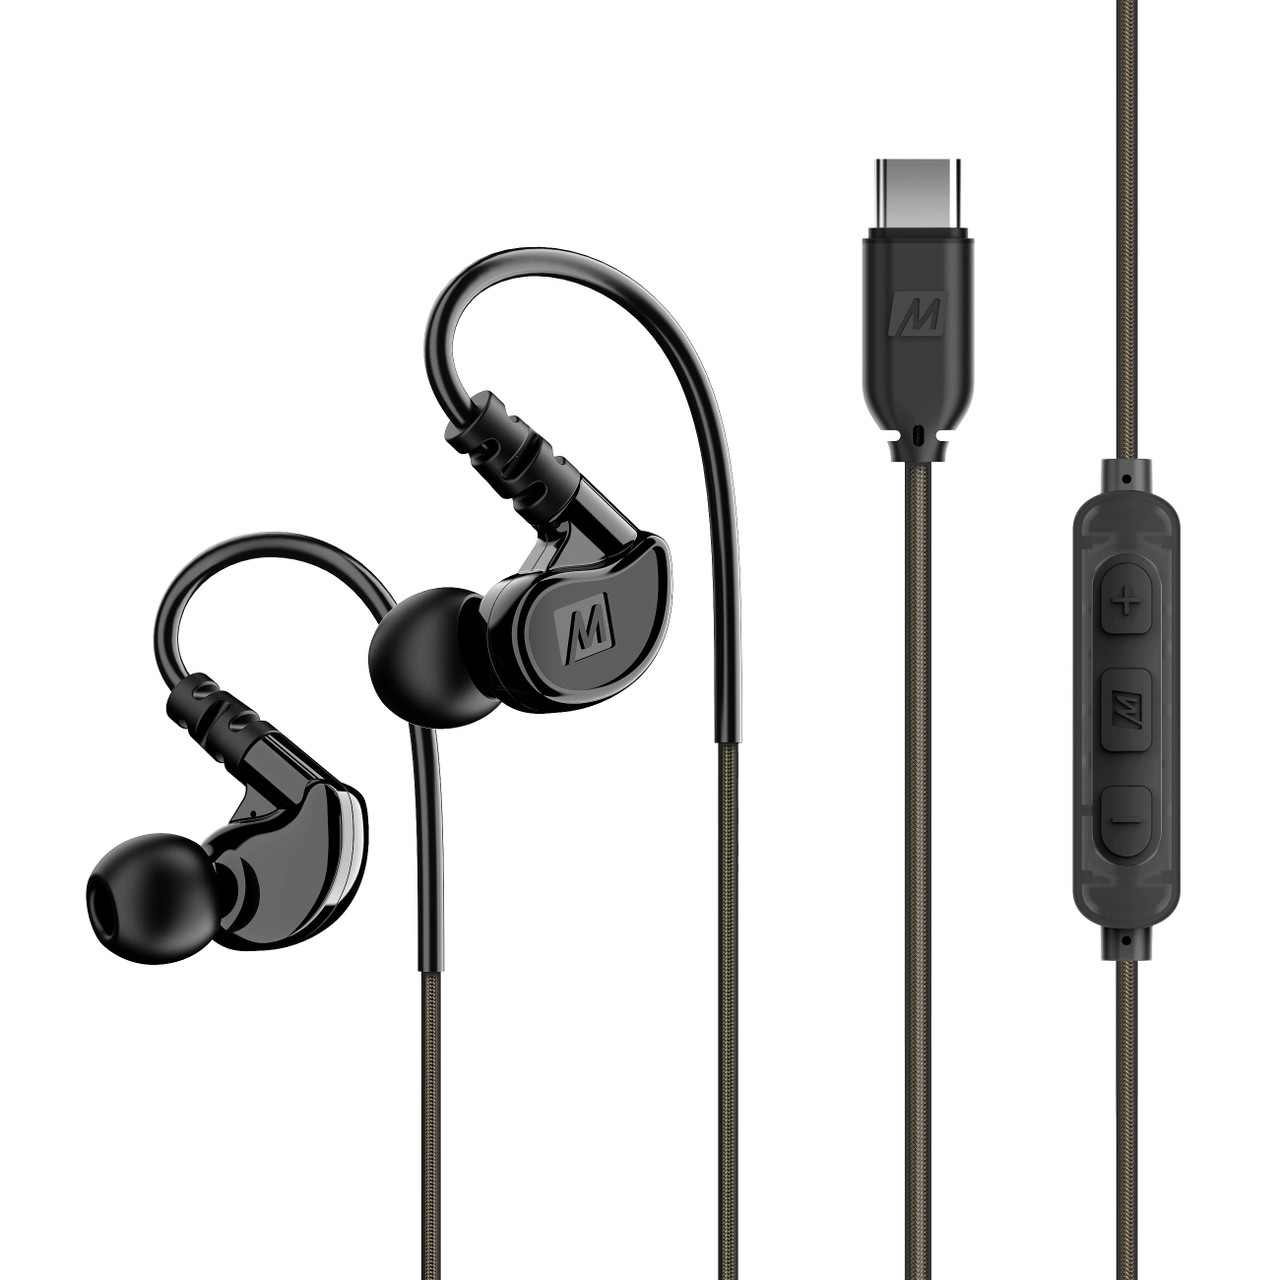 USB Type-C wired earbuds with mic, Five Below